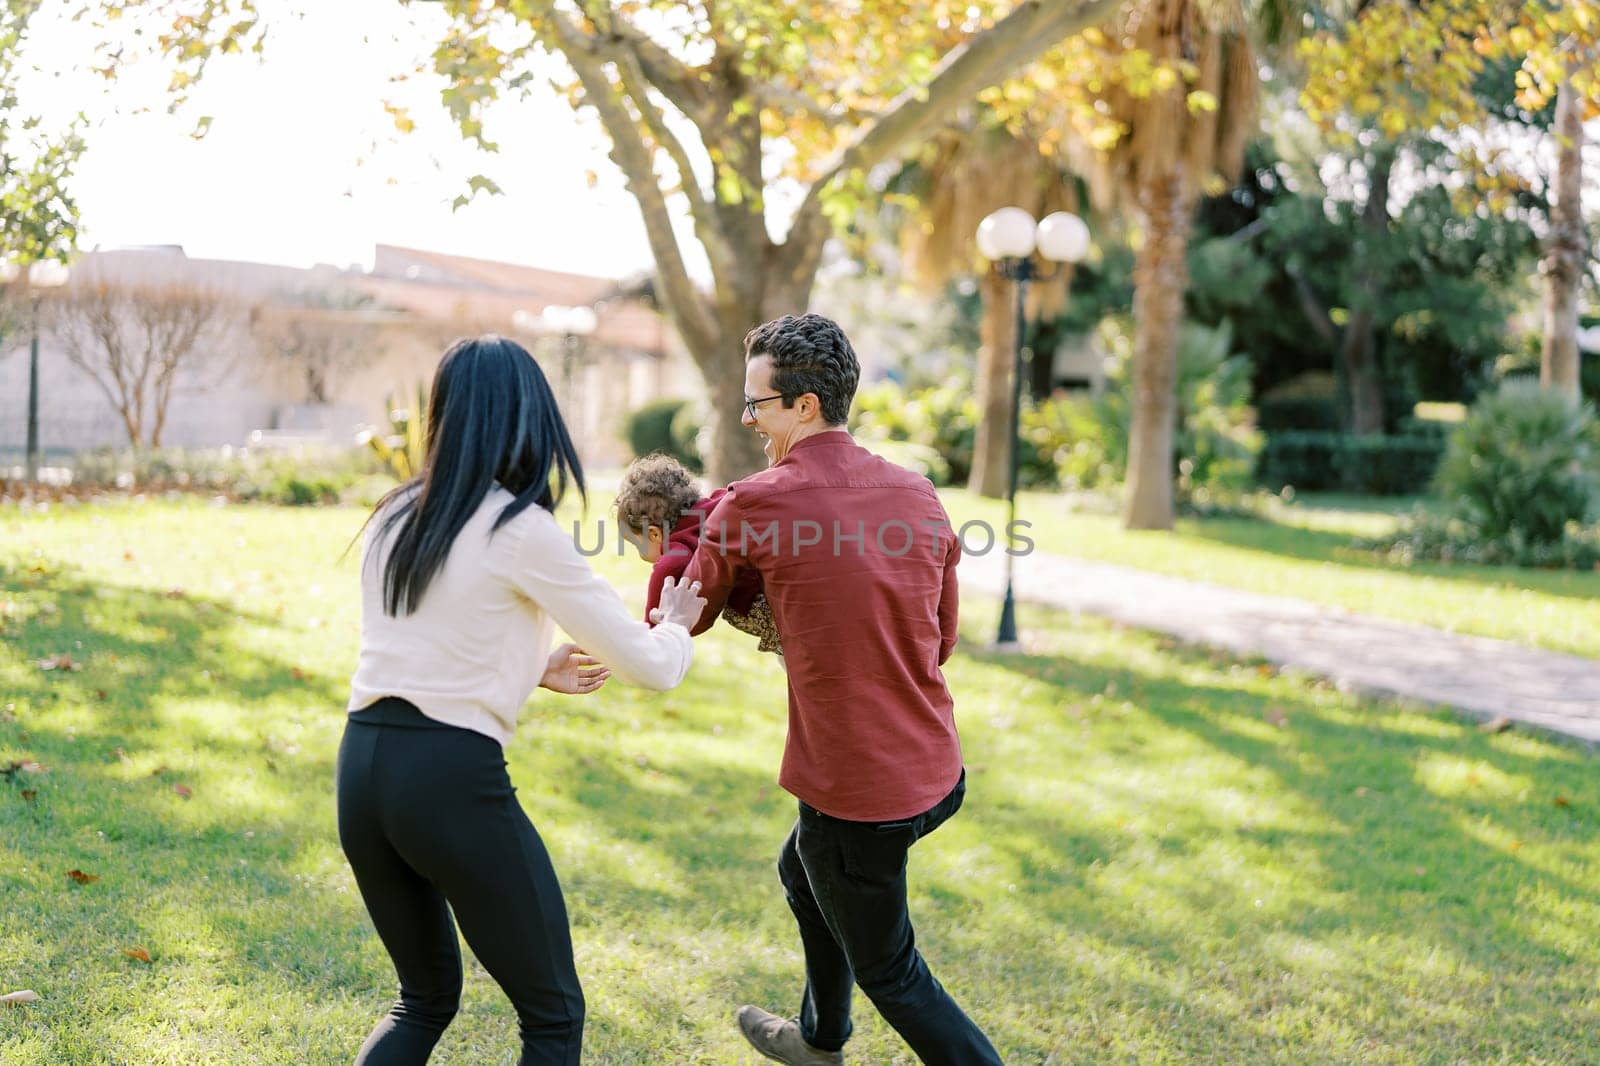 Laughing dad runs around mom in the park with a little girl in his arms. High quality photo